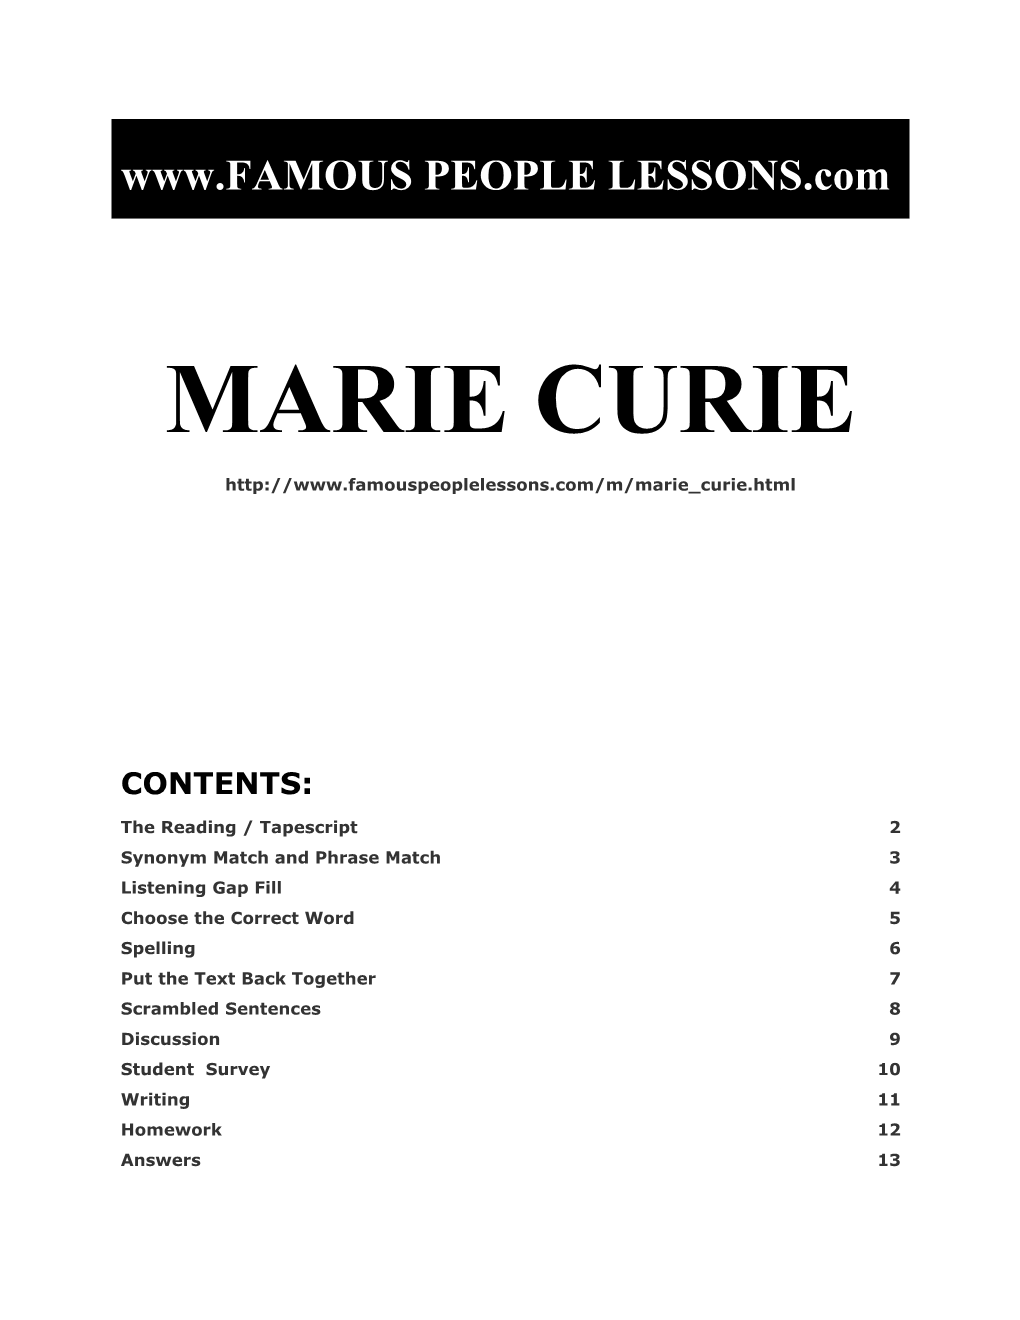 Famous People Lessons - Marie Curie